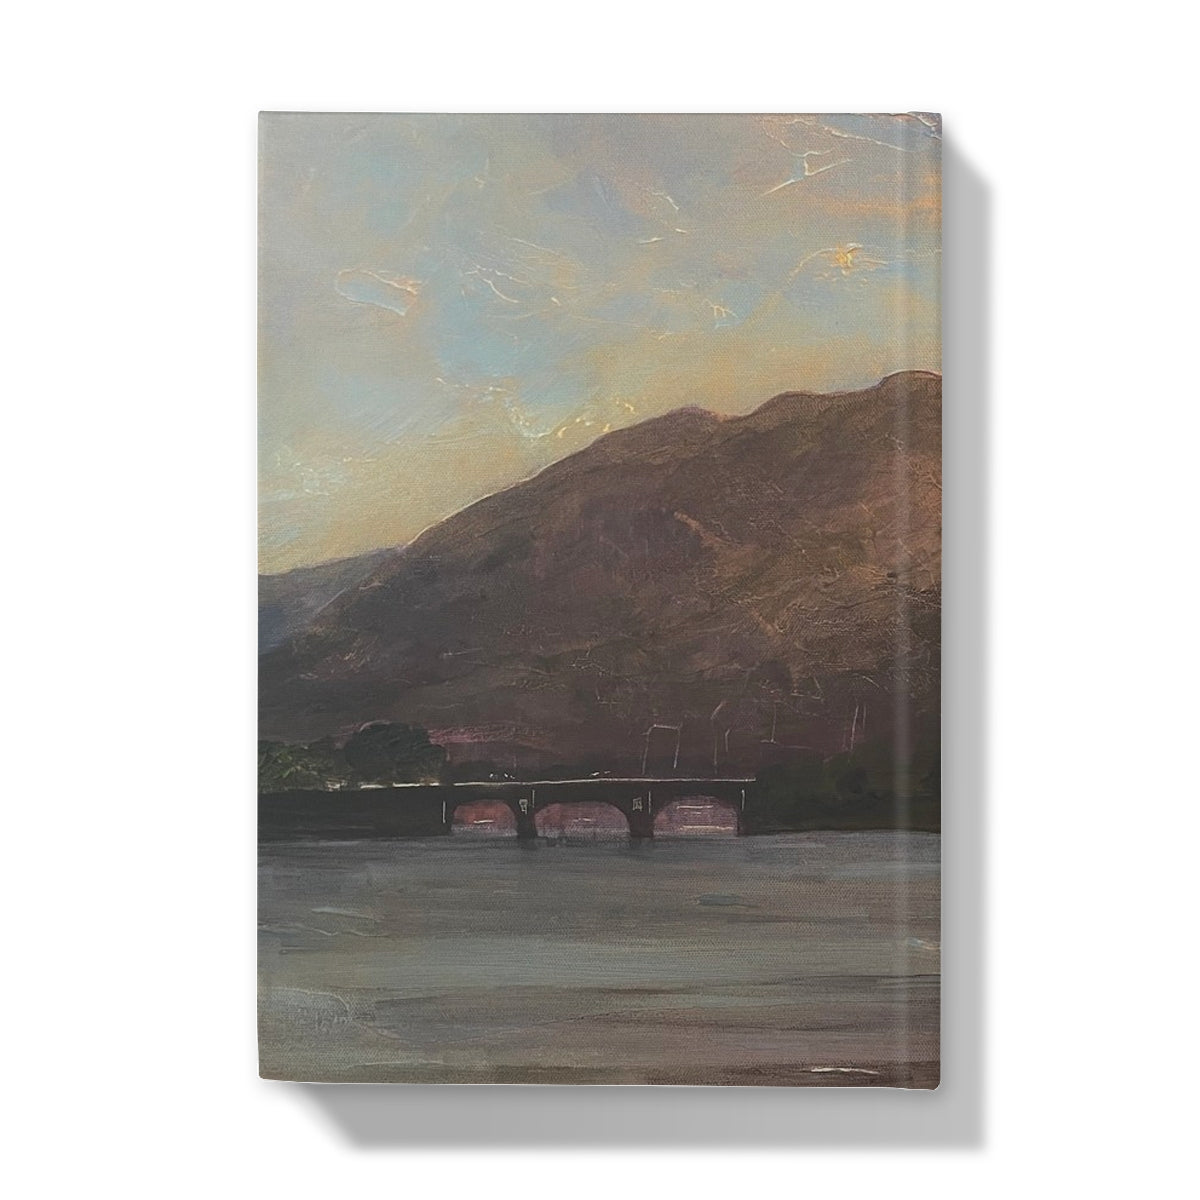 Eilean Donan Castle Art Gifts Hardback Journal-Journals & Notebooks-Historic & Iconic Scotland Art Gallery-Paintings, Prints, Homeware, Art Gifts From Scotland By Scottish Artist Kevin Hunter